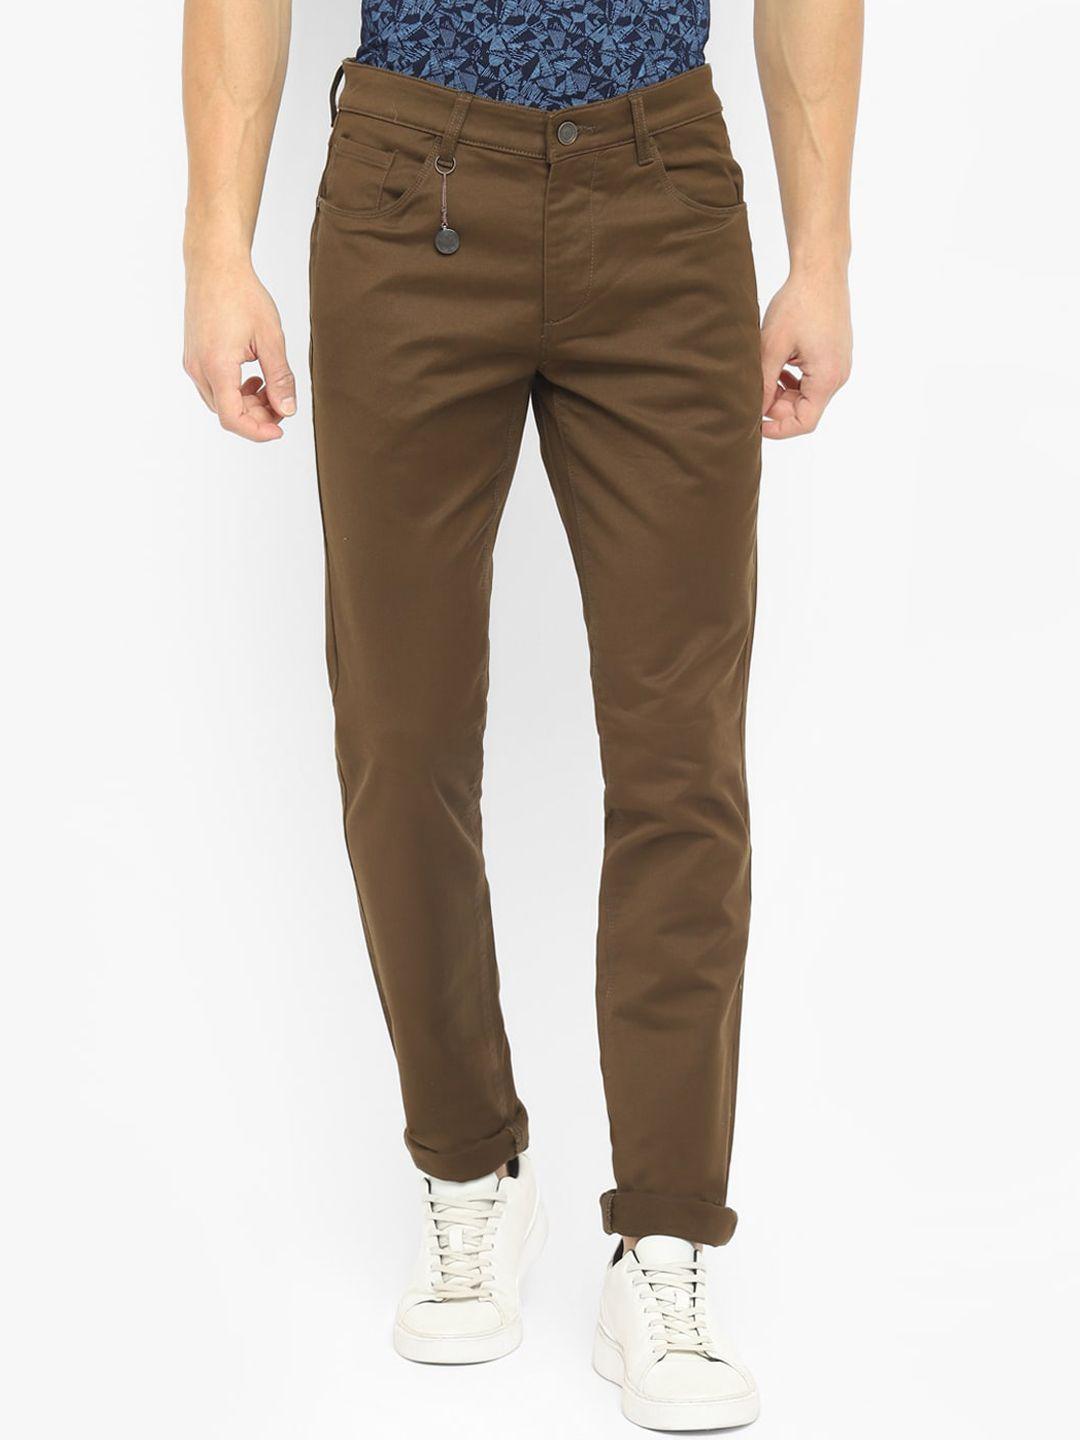 turtle-men-brown-narrow-tapered-fit-jeans